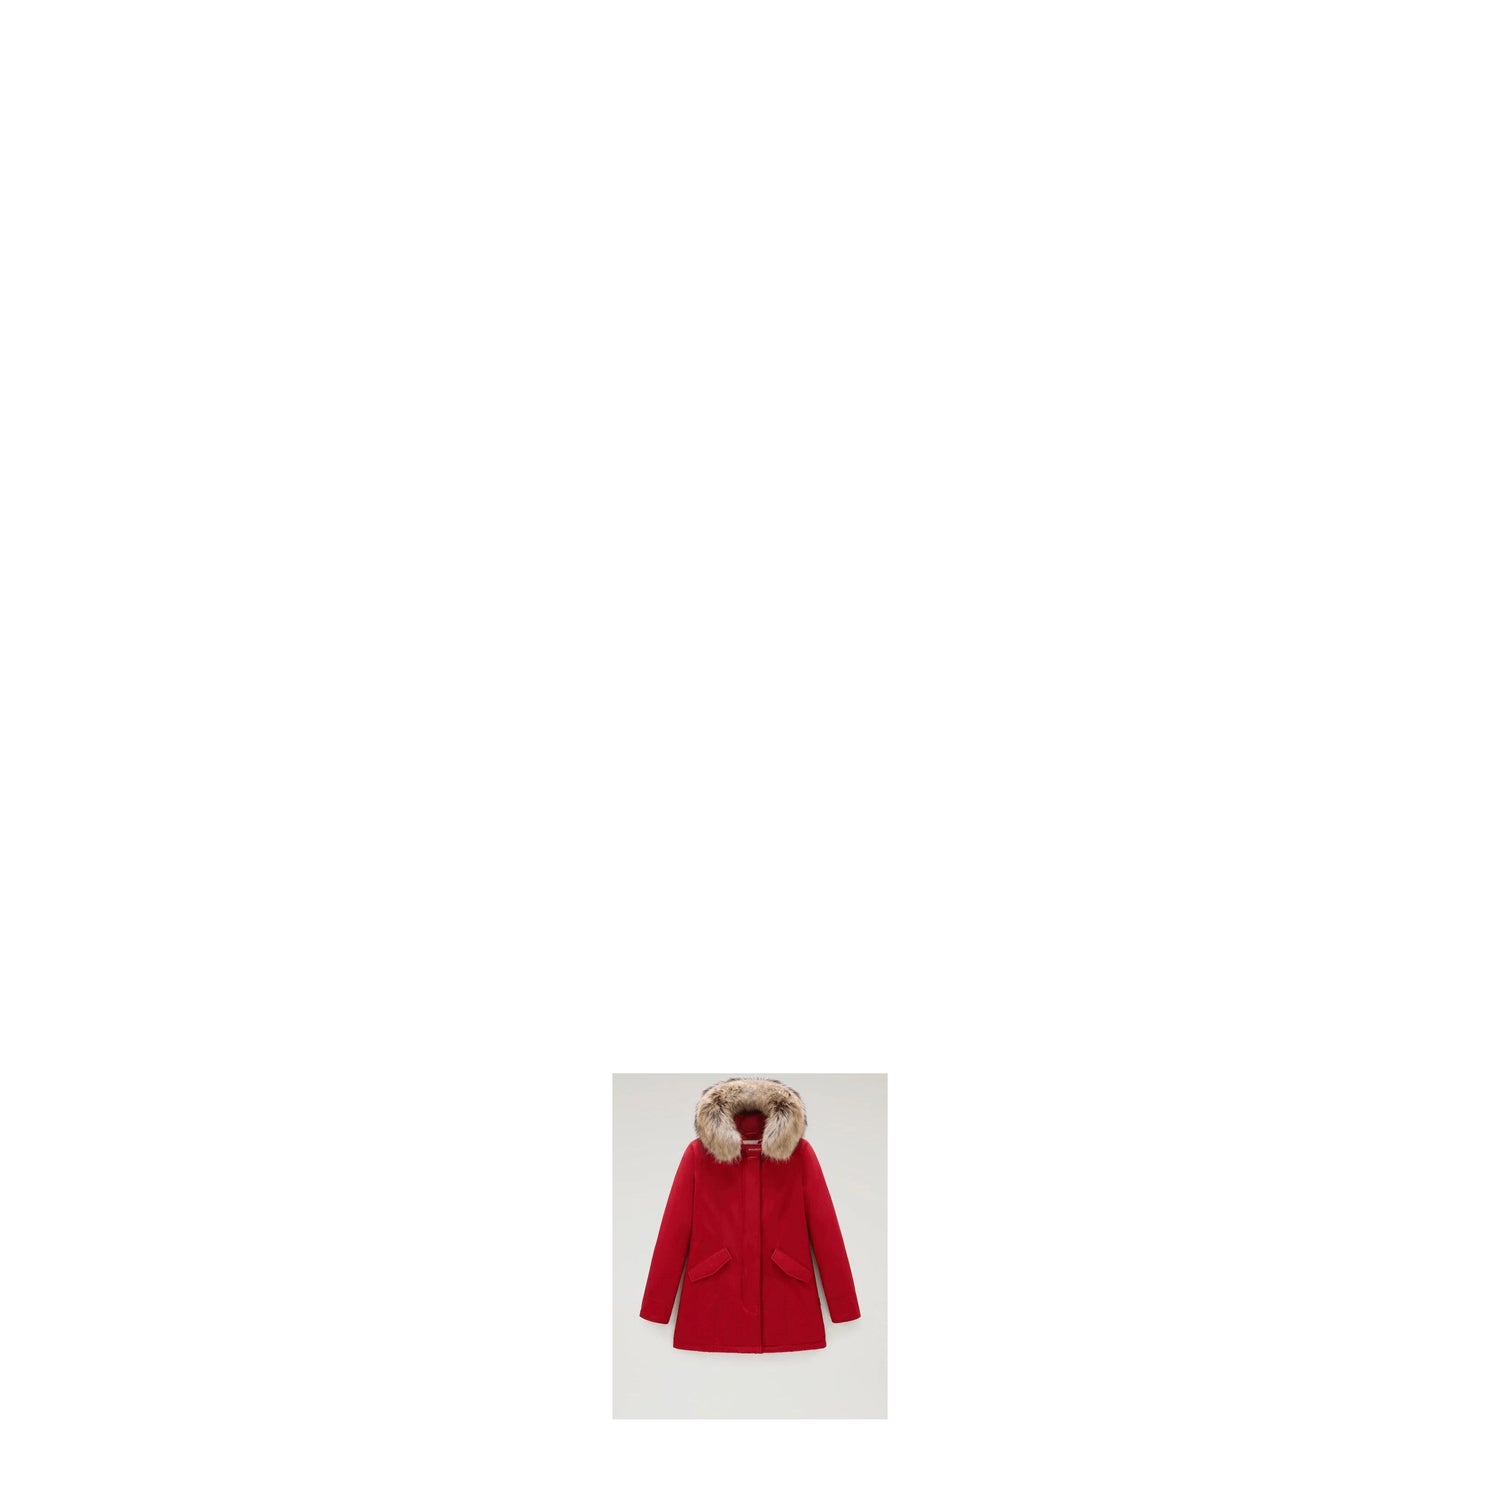 Woolrich Idee Regalo Jacket artic parka Donna Cotone Rosso Rosso Scuro